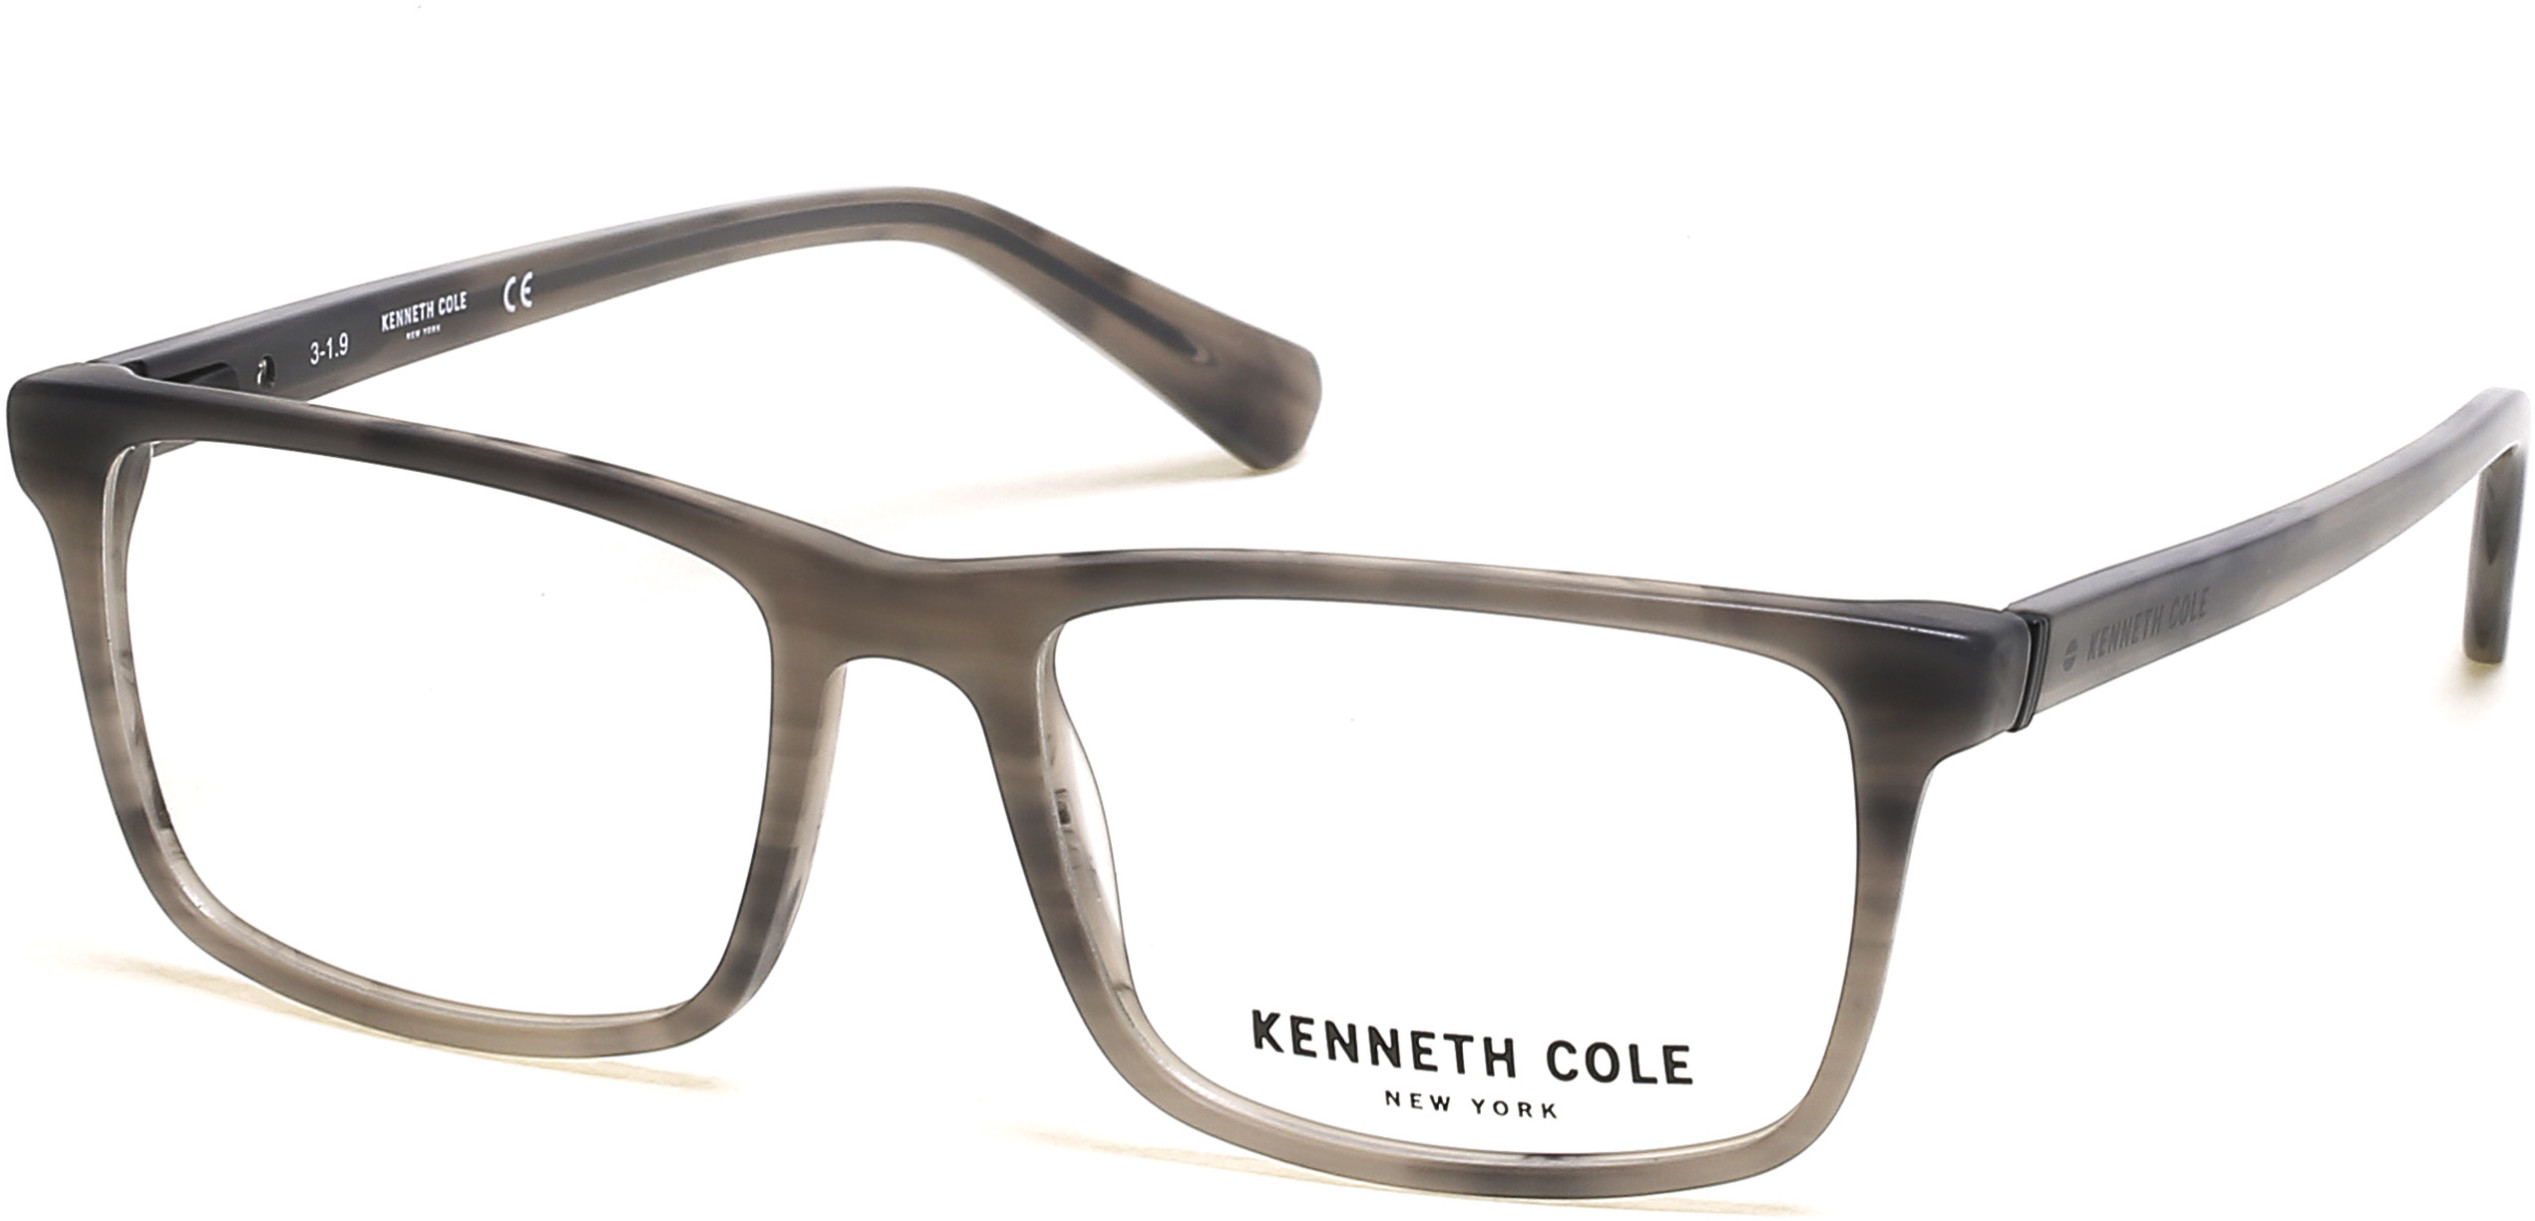 KENNETH COLE NY 0300 020